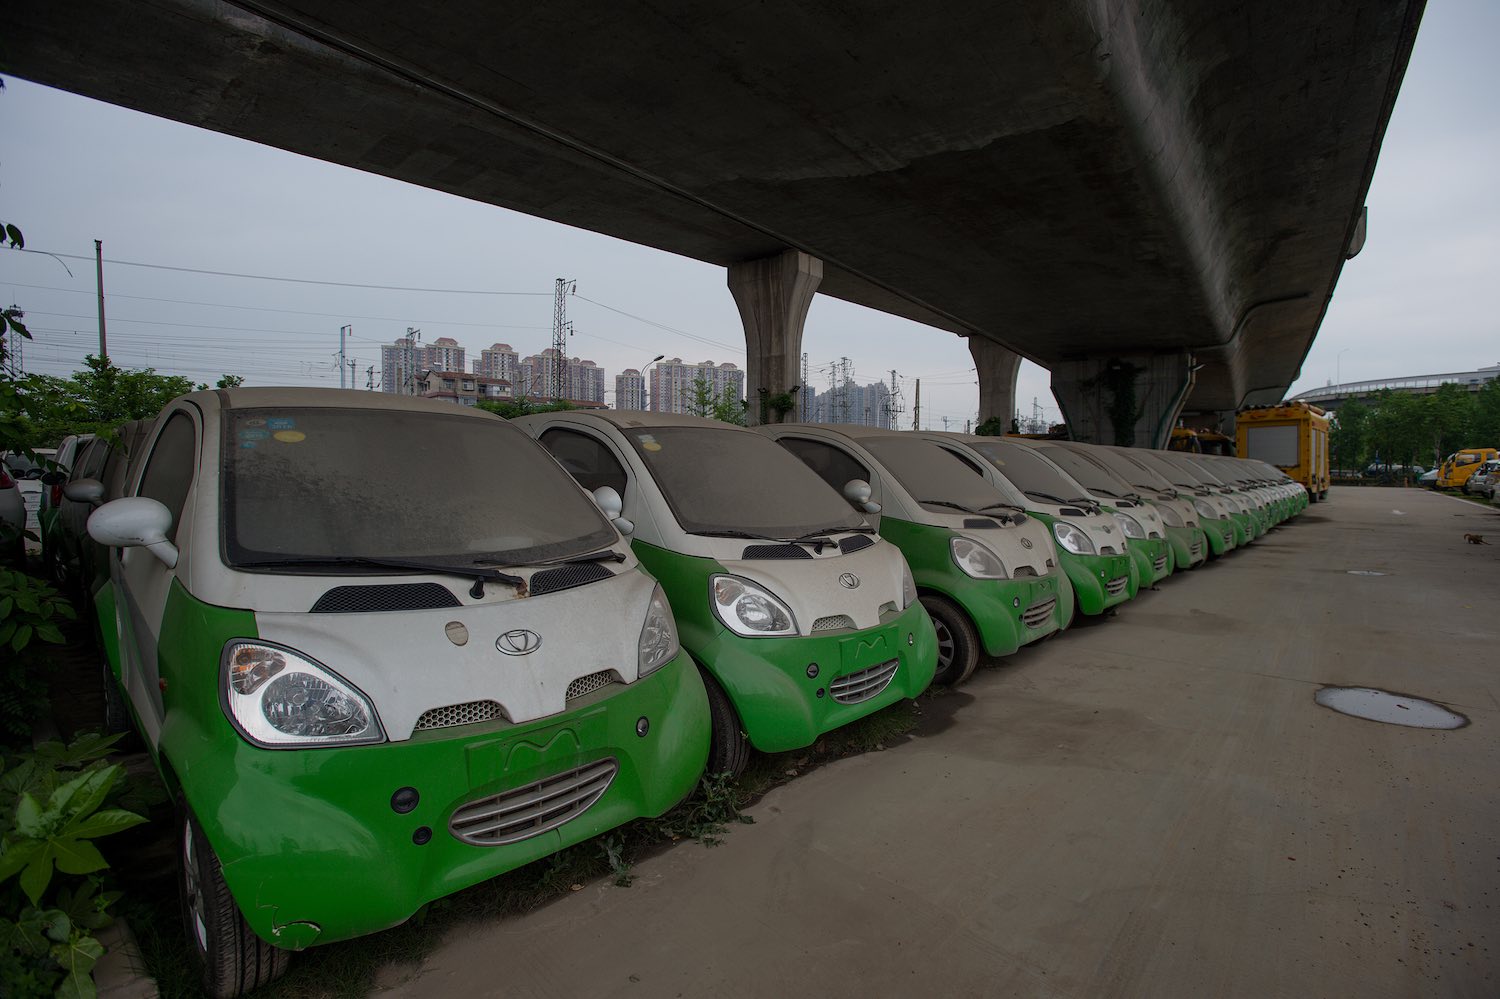 A row of unused electric vehicles (EVs) parked under a bridge in China have lithium-ion battery packs.